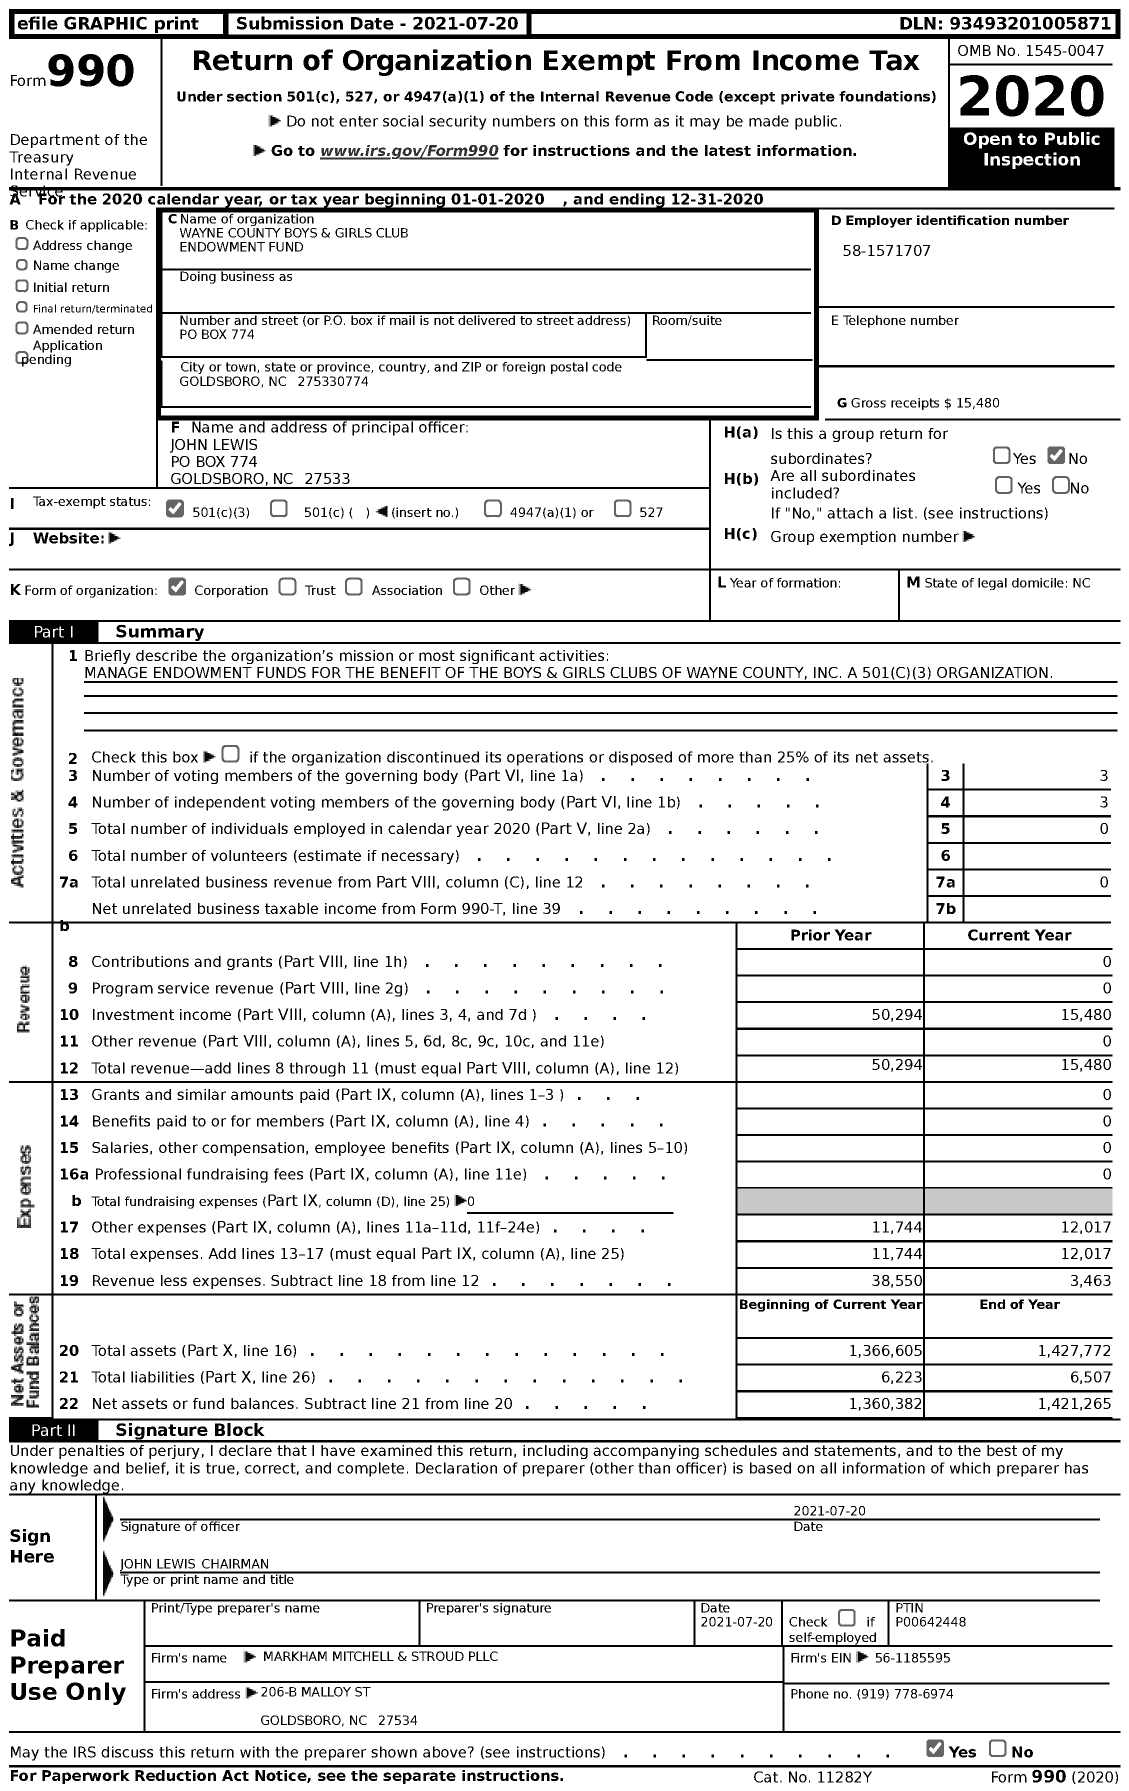 Image of first page of 2020 Form 990 for Wayne County Boys and Girls Club Endowment Fund